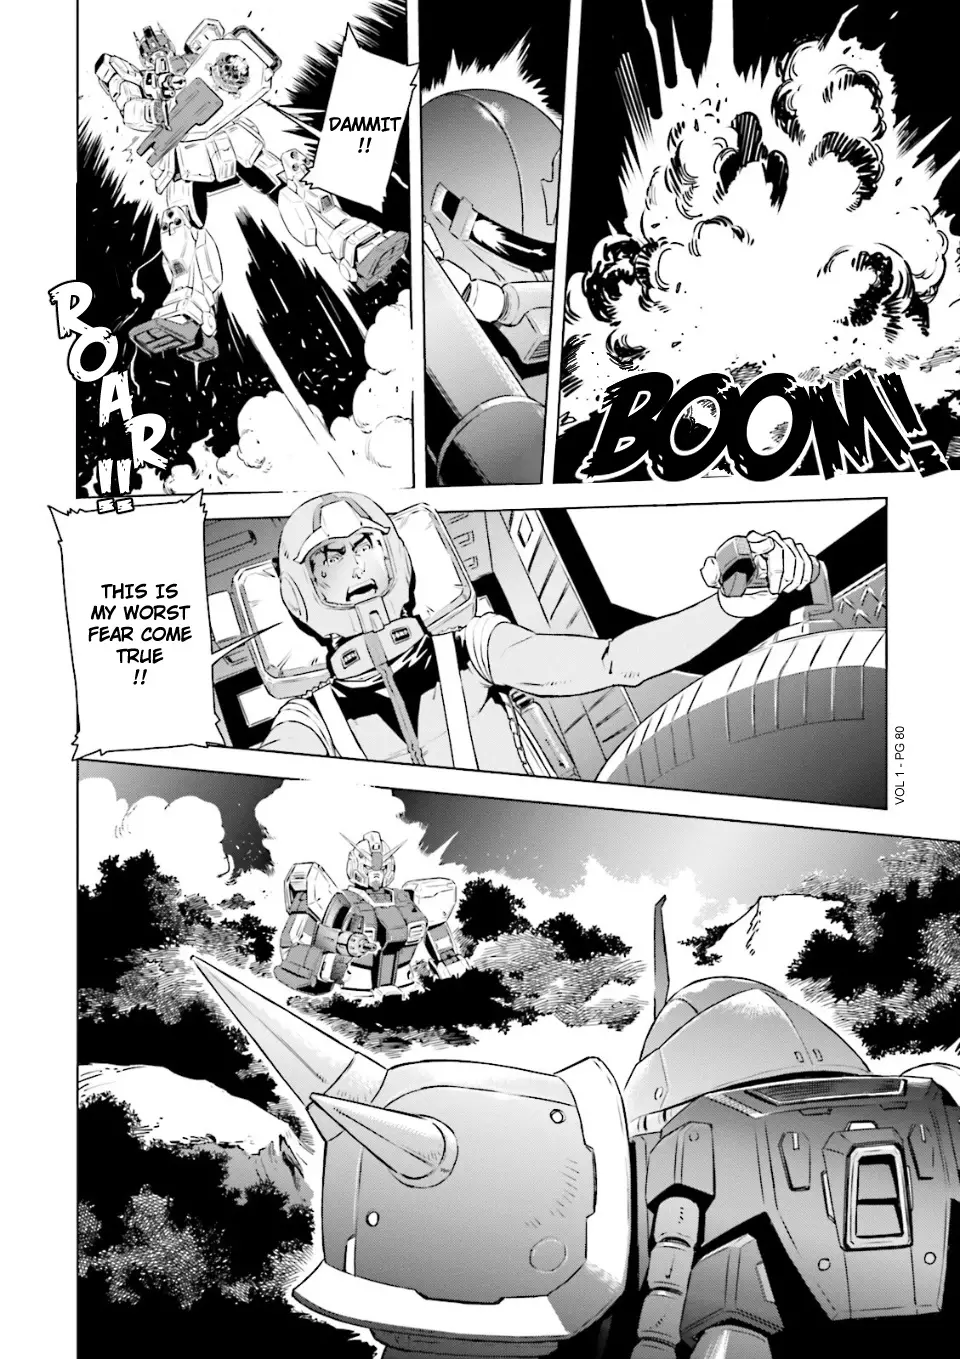 Mobile Suit Gundam Side Story - Missing Link - 3 page 14-7c981182